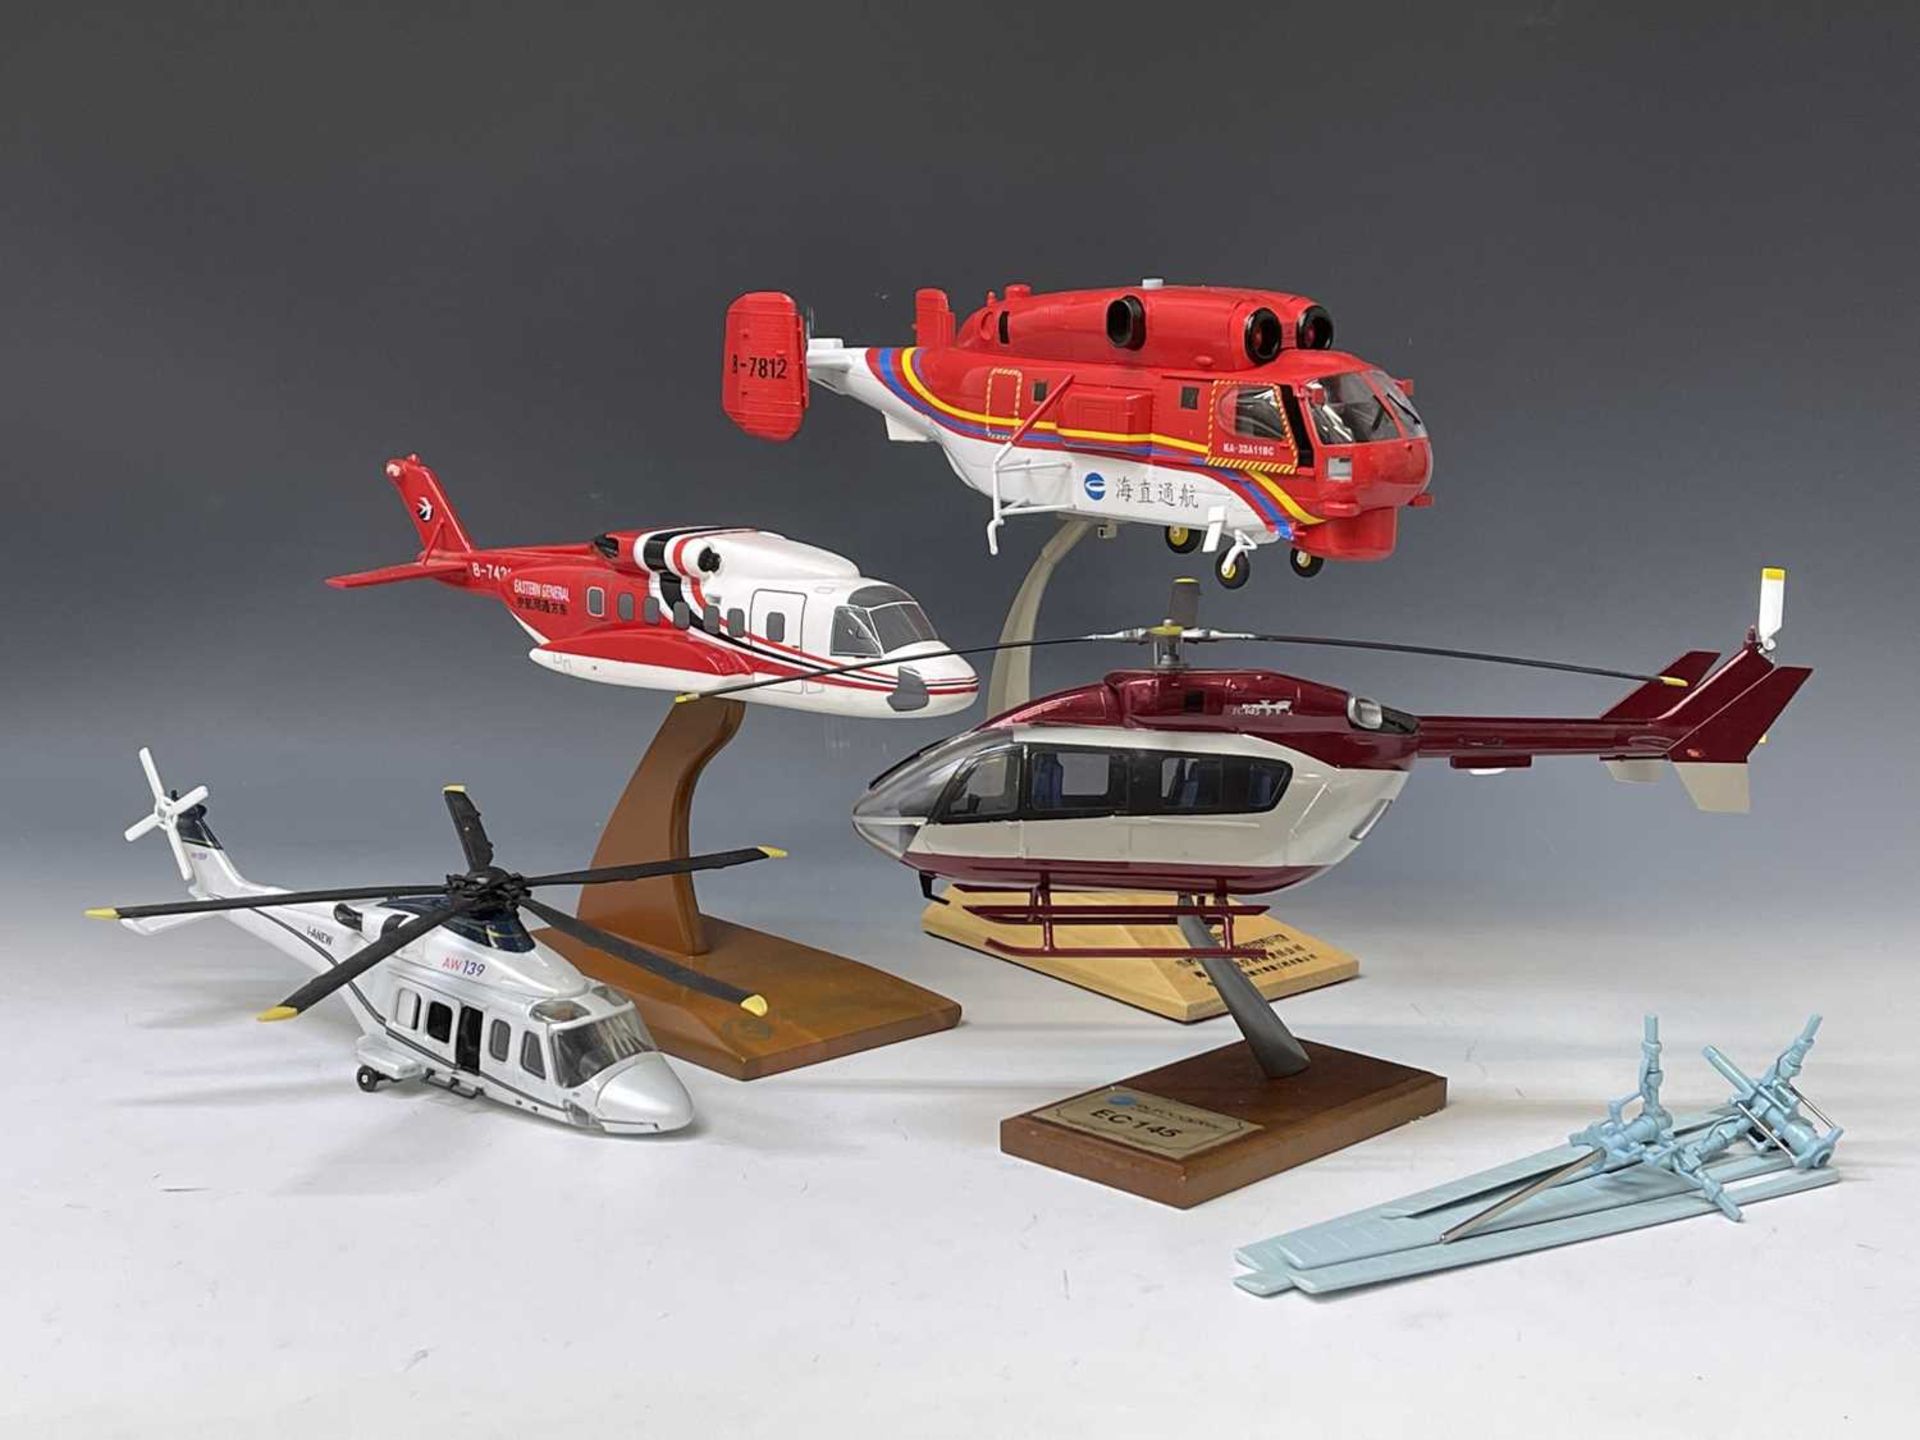 Large Size Diecast / Plastic Helicopters (x4). Comprising: A Eurocopter, A Citic offshore Helicopter